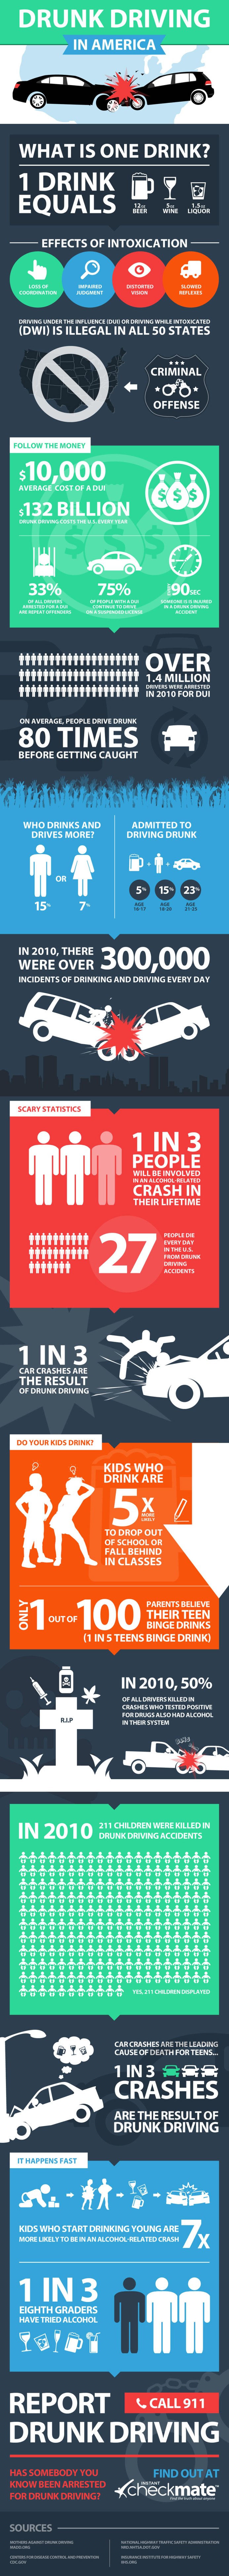 drunk-driving-stats1